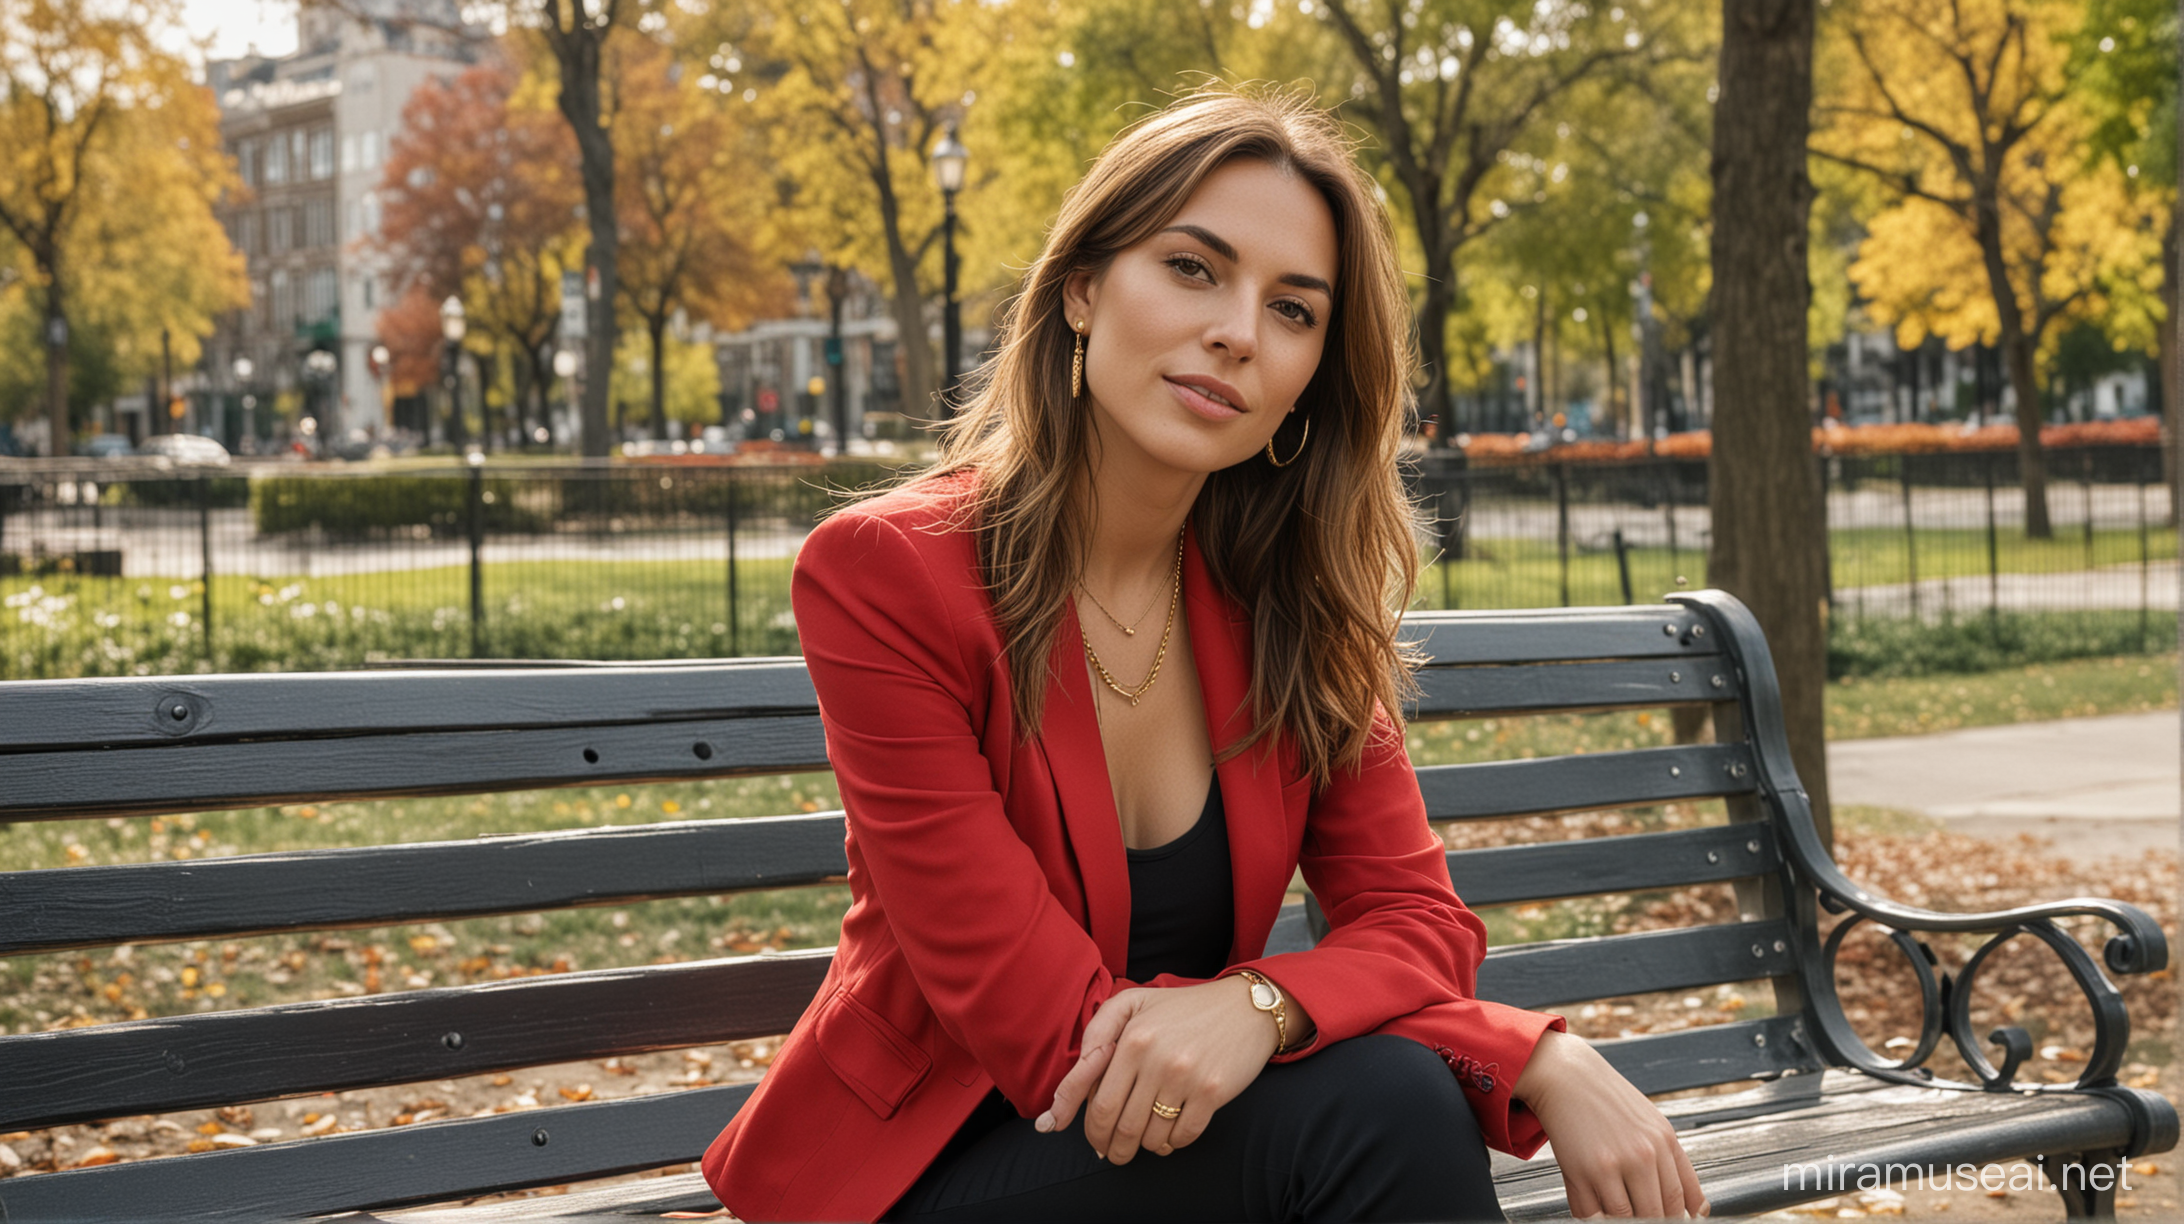 30 year old white woman sitting on a park bench in an urban park closeup. She has long brown hair parted to the right. She is wearing a red blazer, gold necklace with very low cut black shirt and black pants.